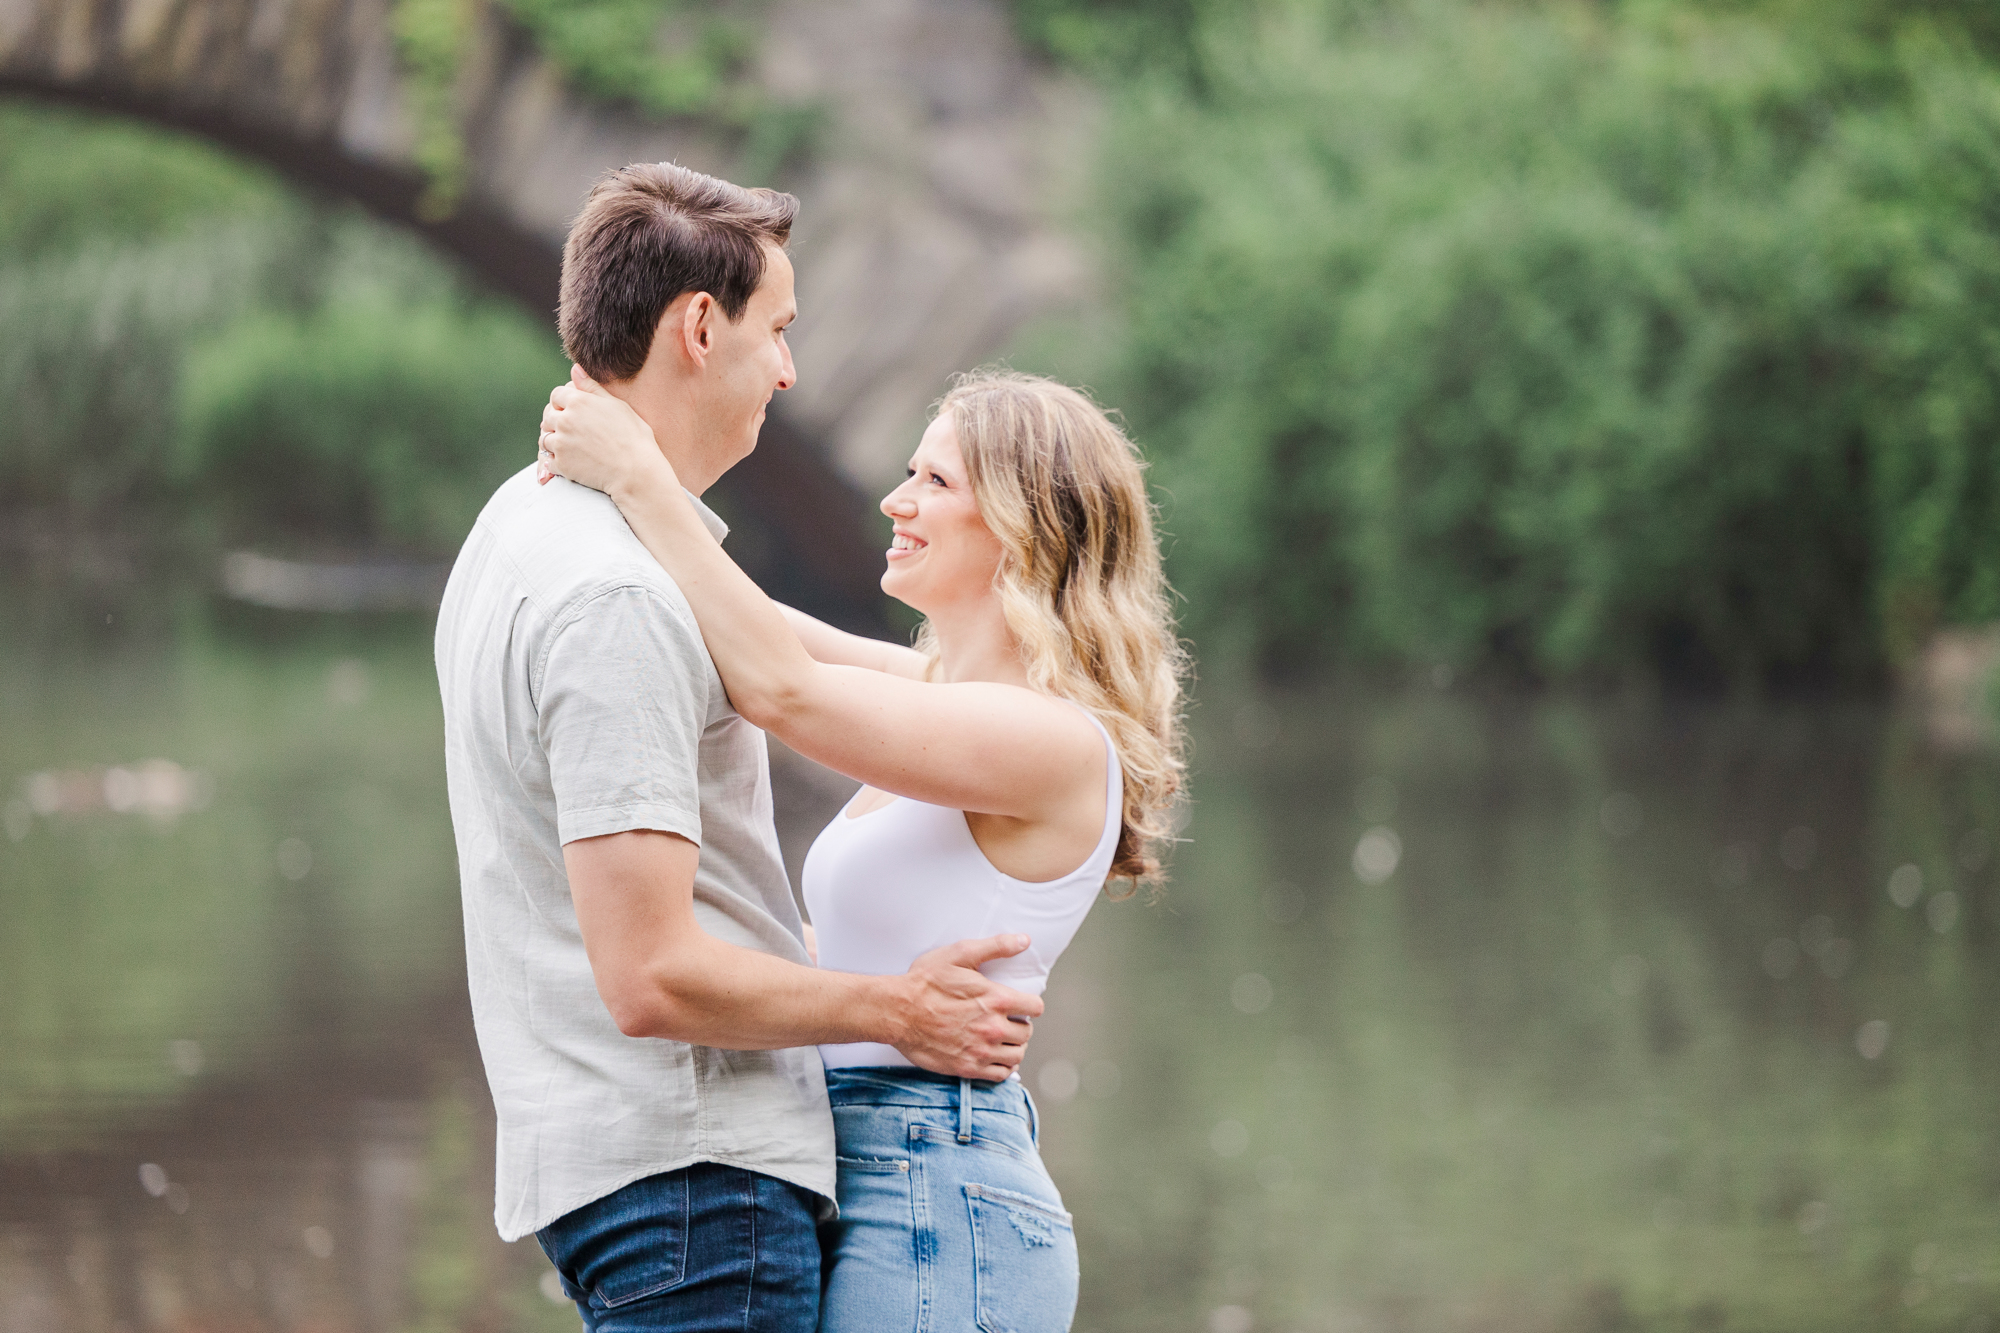 Fun Engagement Session in Central Park